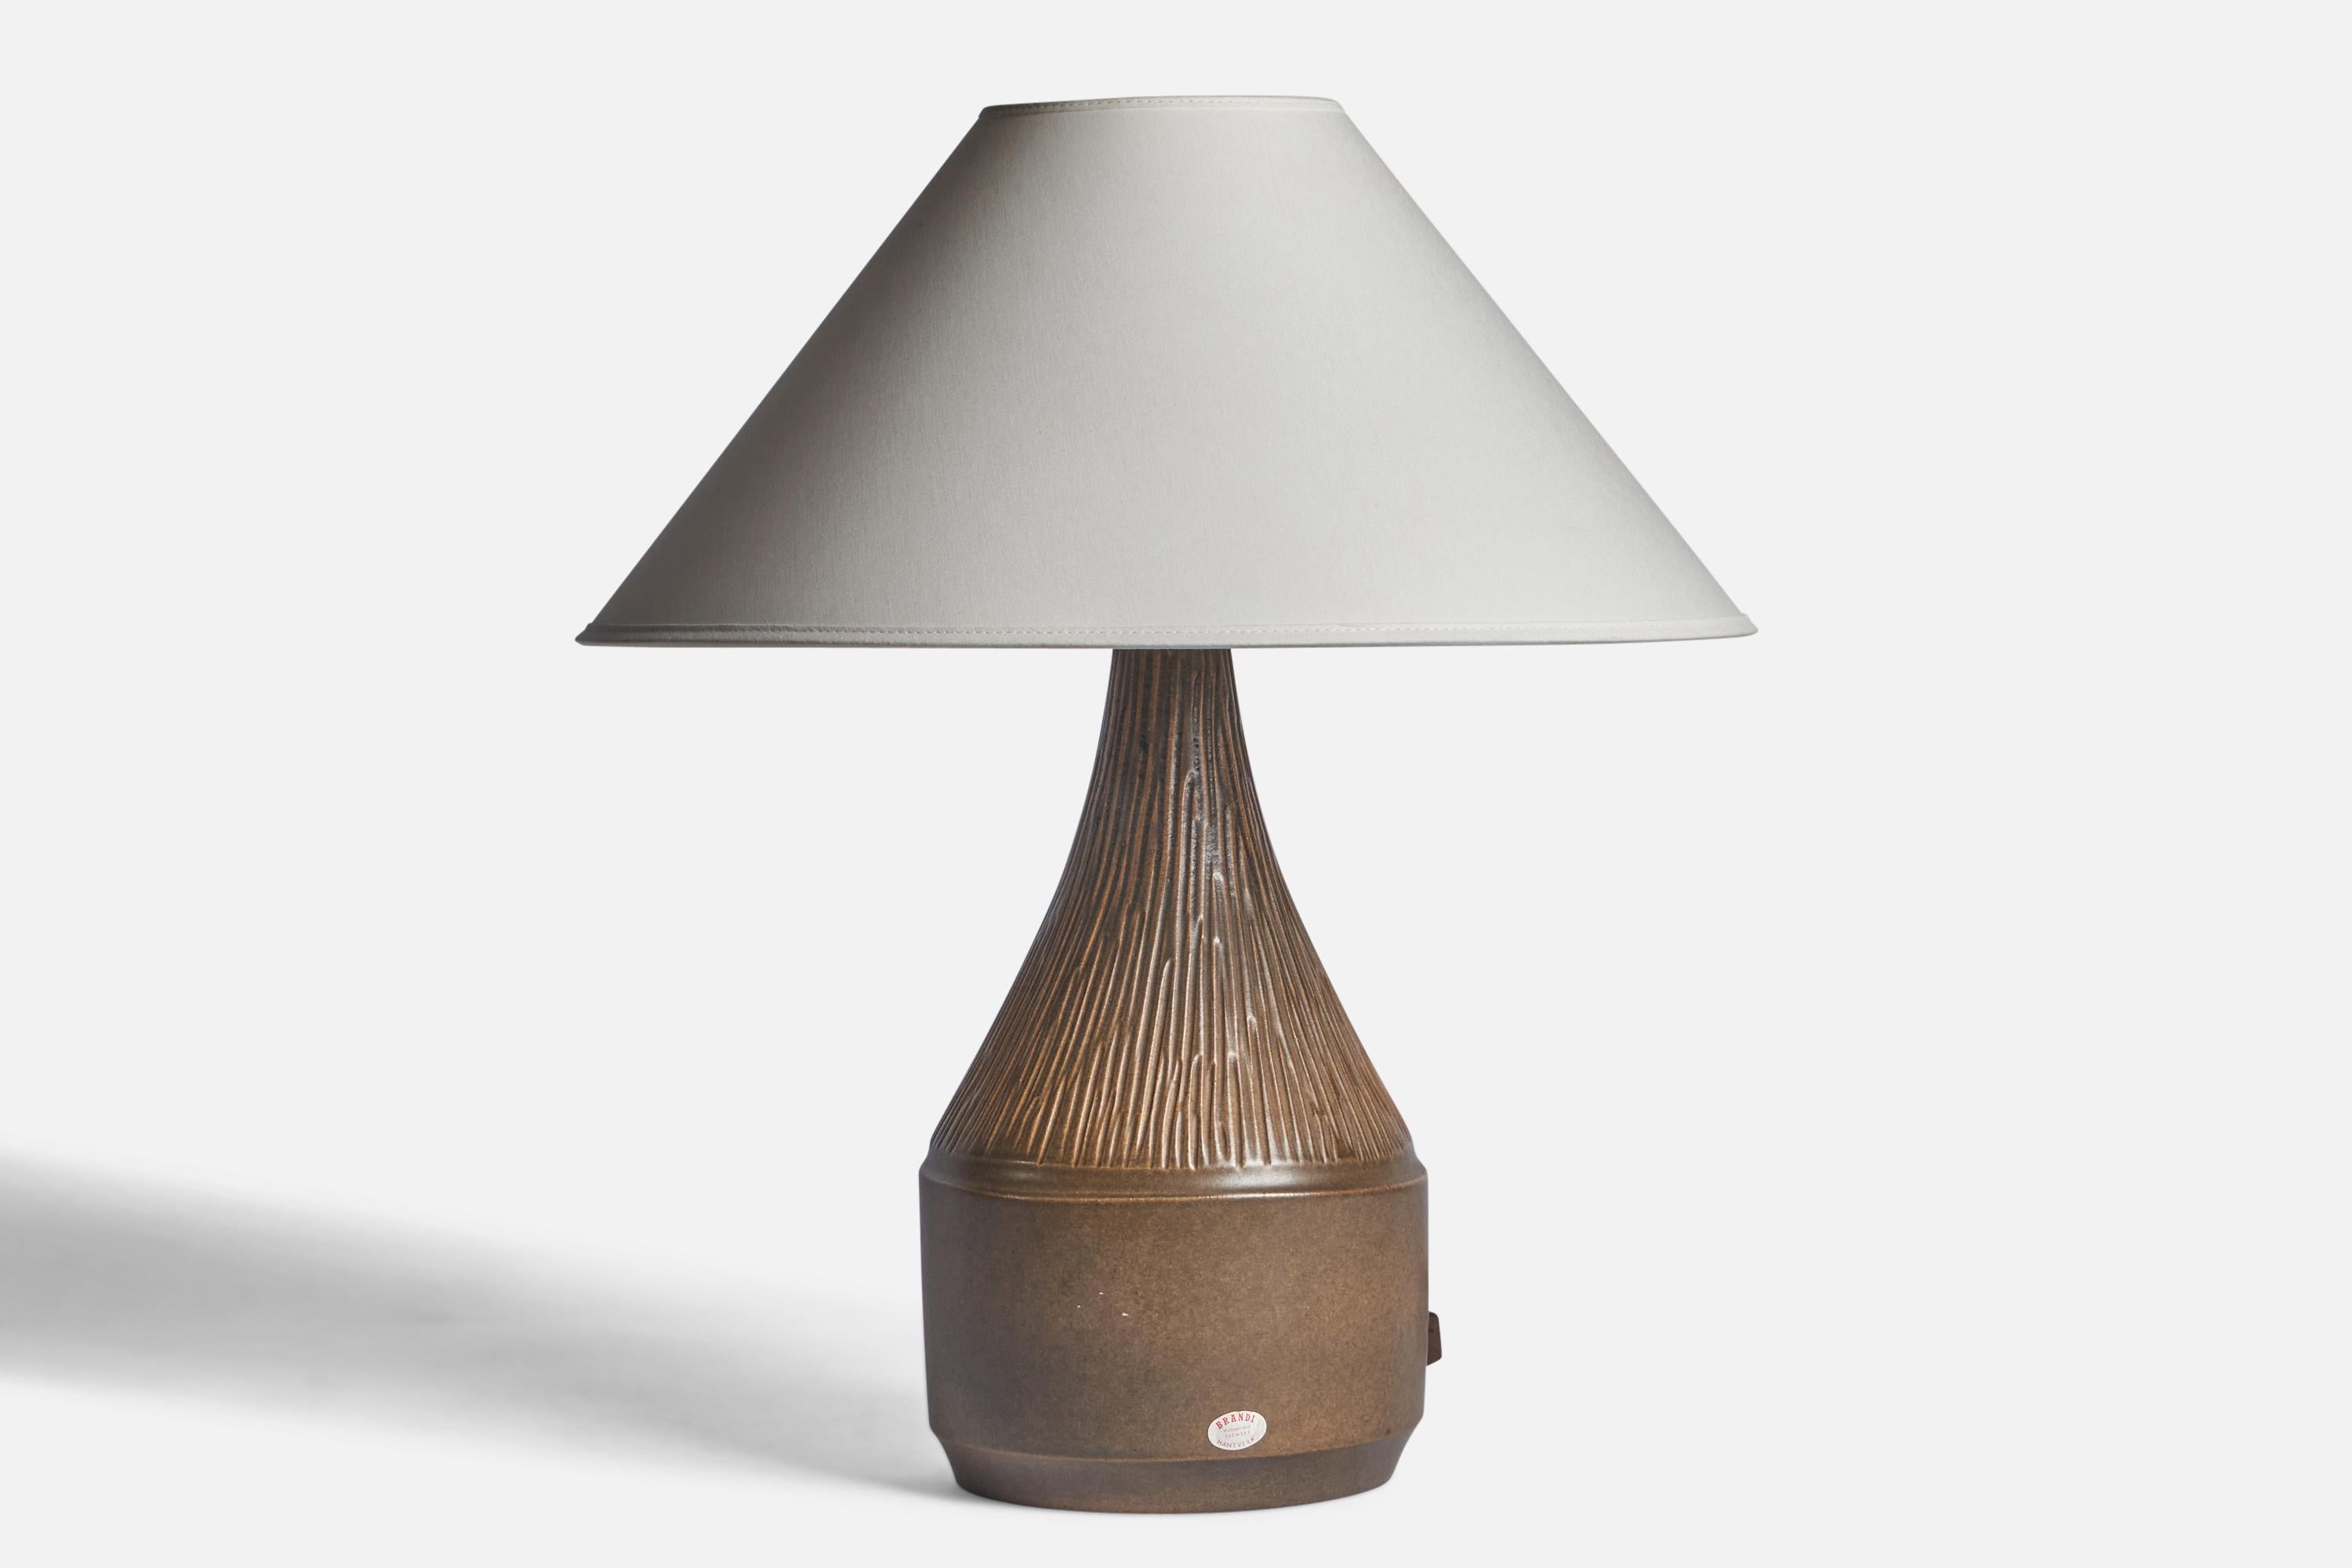 A brown-glazed stoneware table lamp designed and produced by Henry Brandi, Vejbystrand, Sweden, c. 1960s.

Dimensions of Lamp (inches): 14.5” H x 6.75” Diameter
Dimensions of Shade (inches): 4.5” Top Diameter x 16” Bottom Diameter x 7.25”